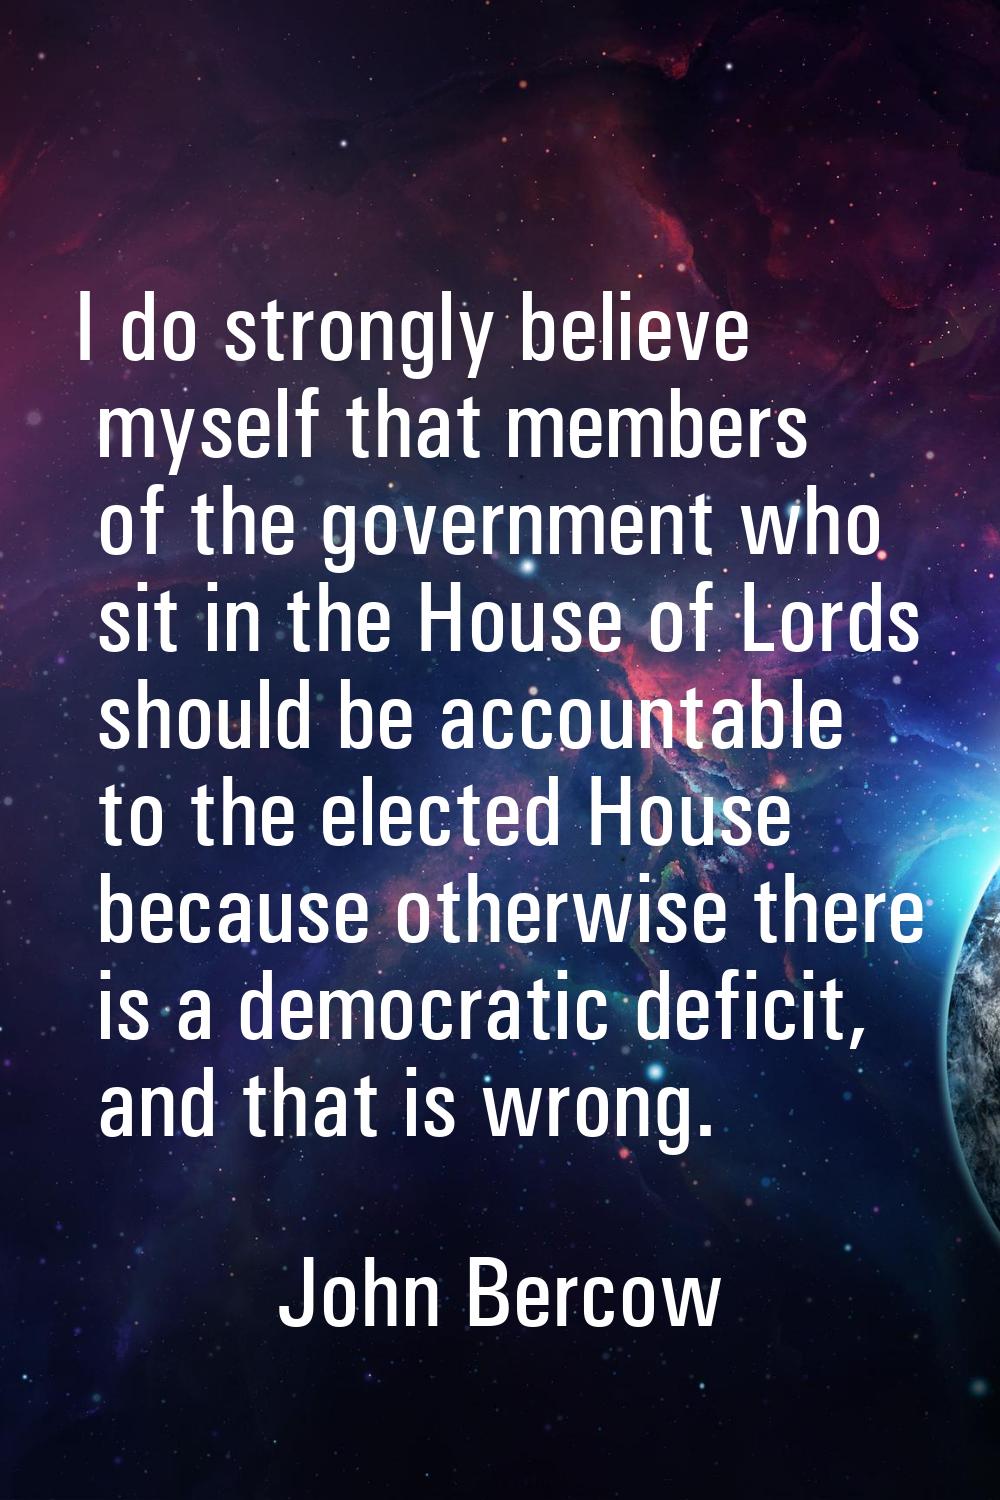 I do strongly believe myself that members of the government who sit in the House of Lords should be